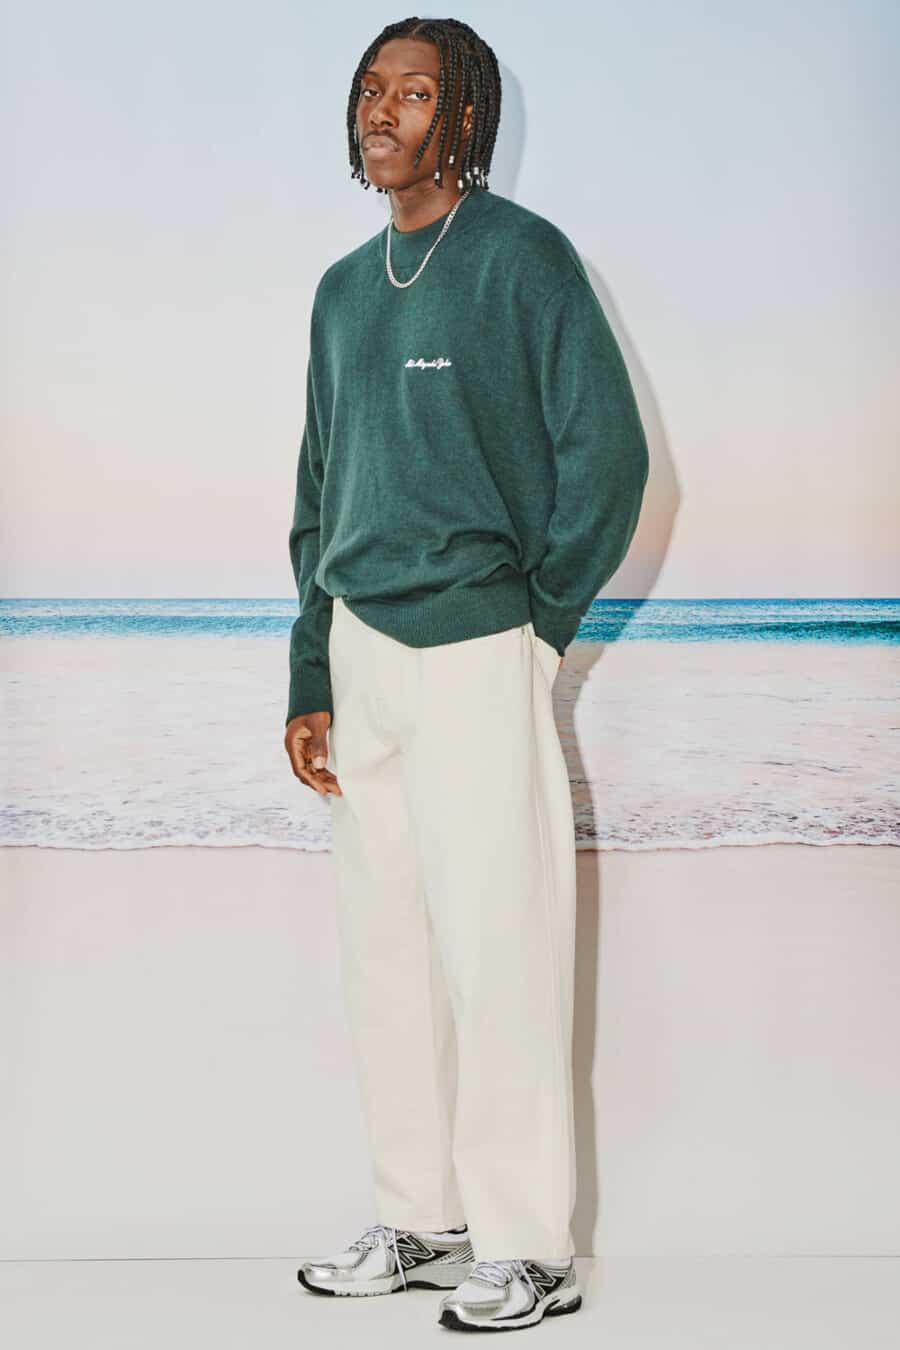 Men's off-white wide-leg pants, green sweatshirt, New Balance running sneakers and grey necklace chain outfit